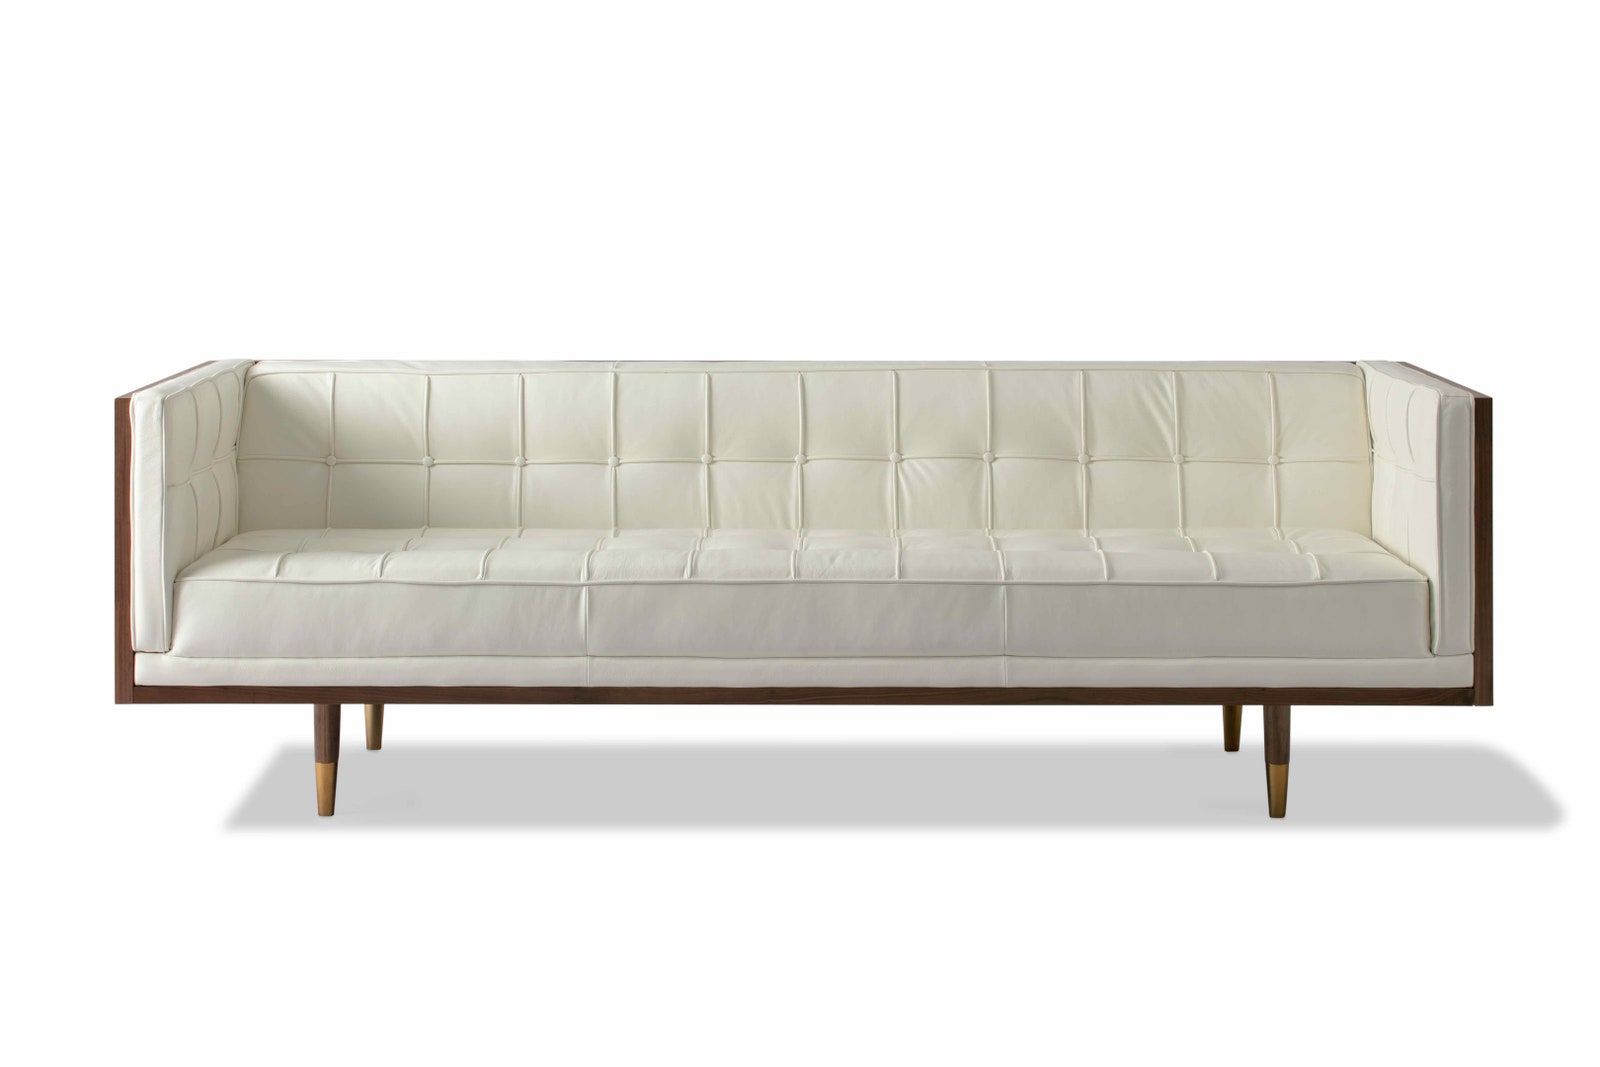 5 Mid Century Modern Sofas To Breathe Life Into Your Living Space |  Architectural Digest Within Mid Century Modern Sofas (Photo 10 of 15)